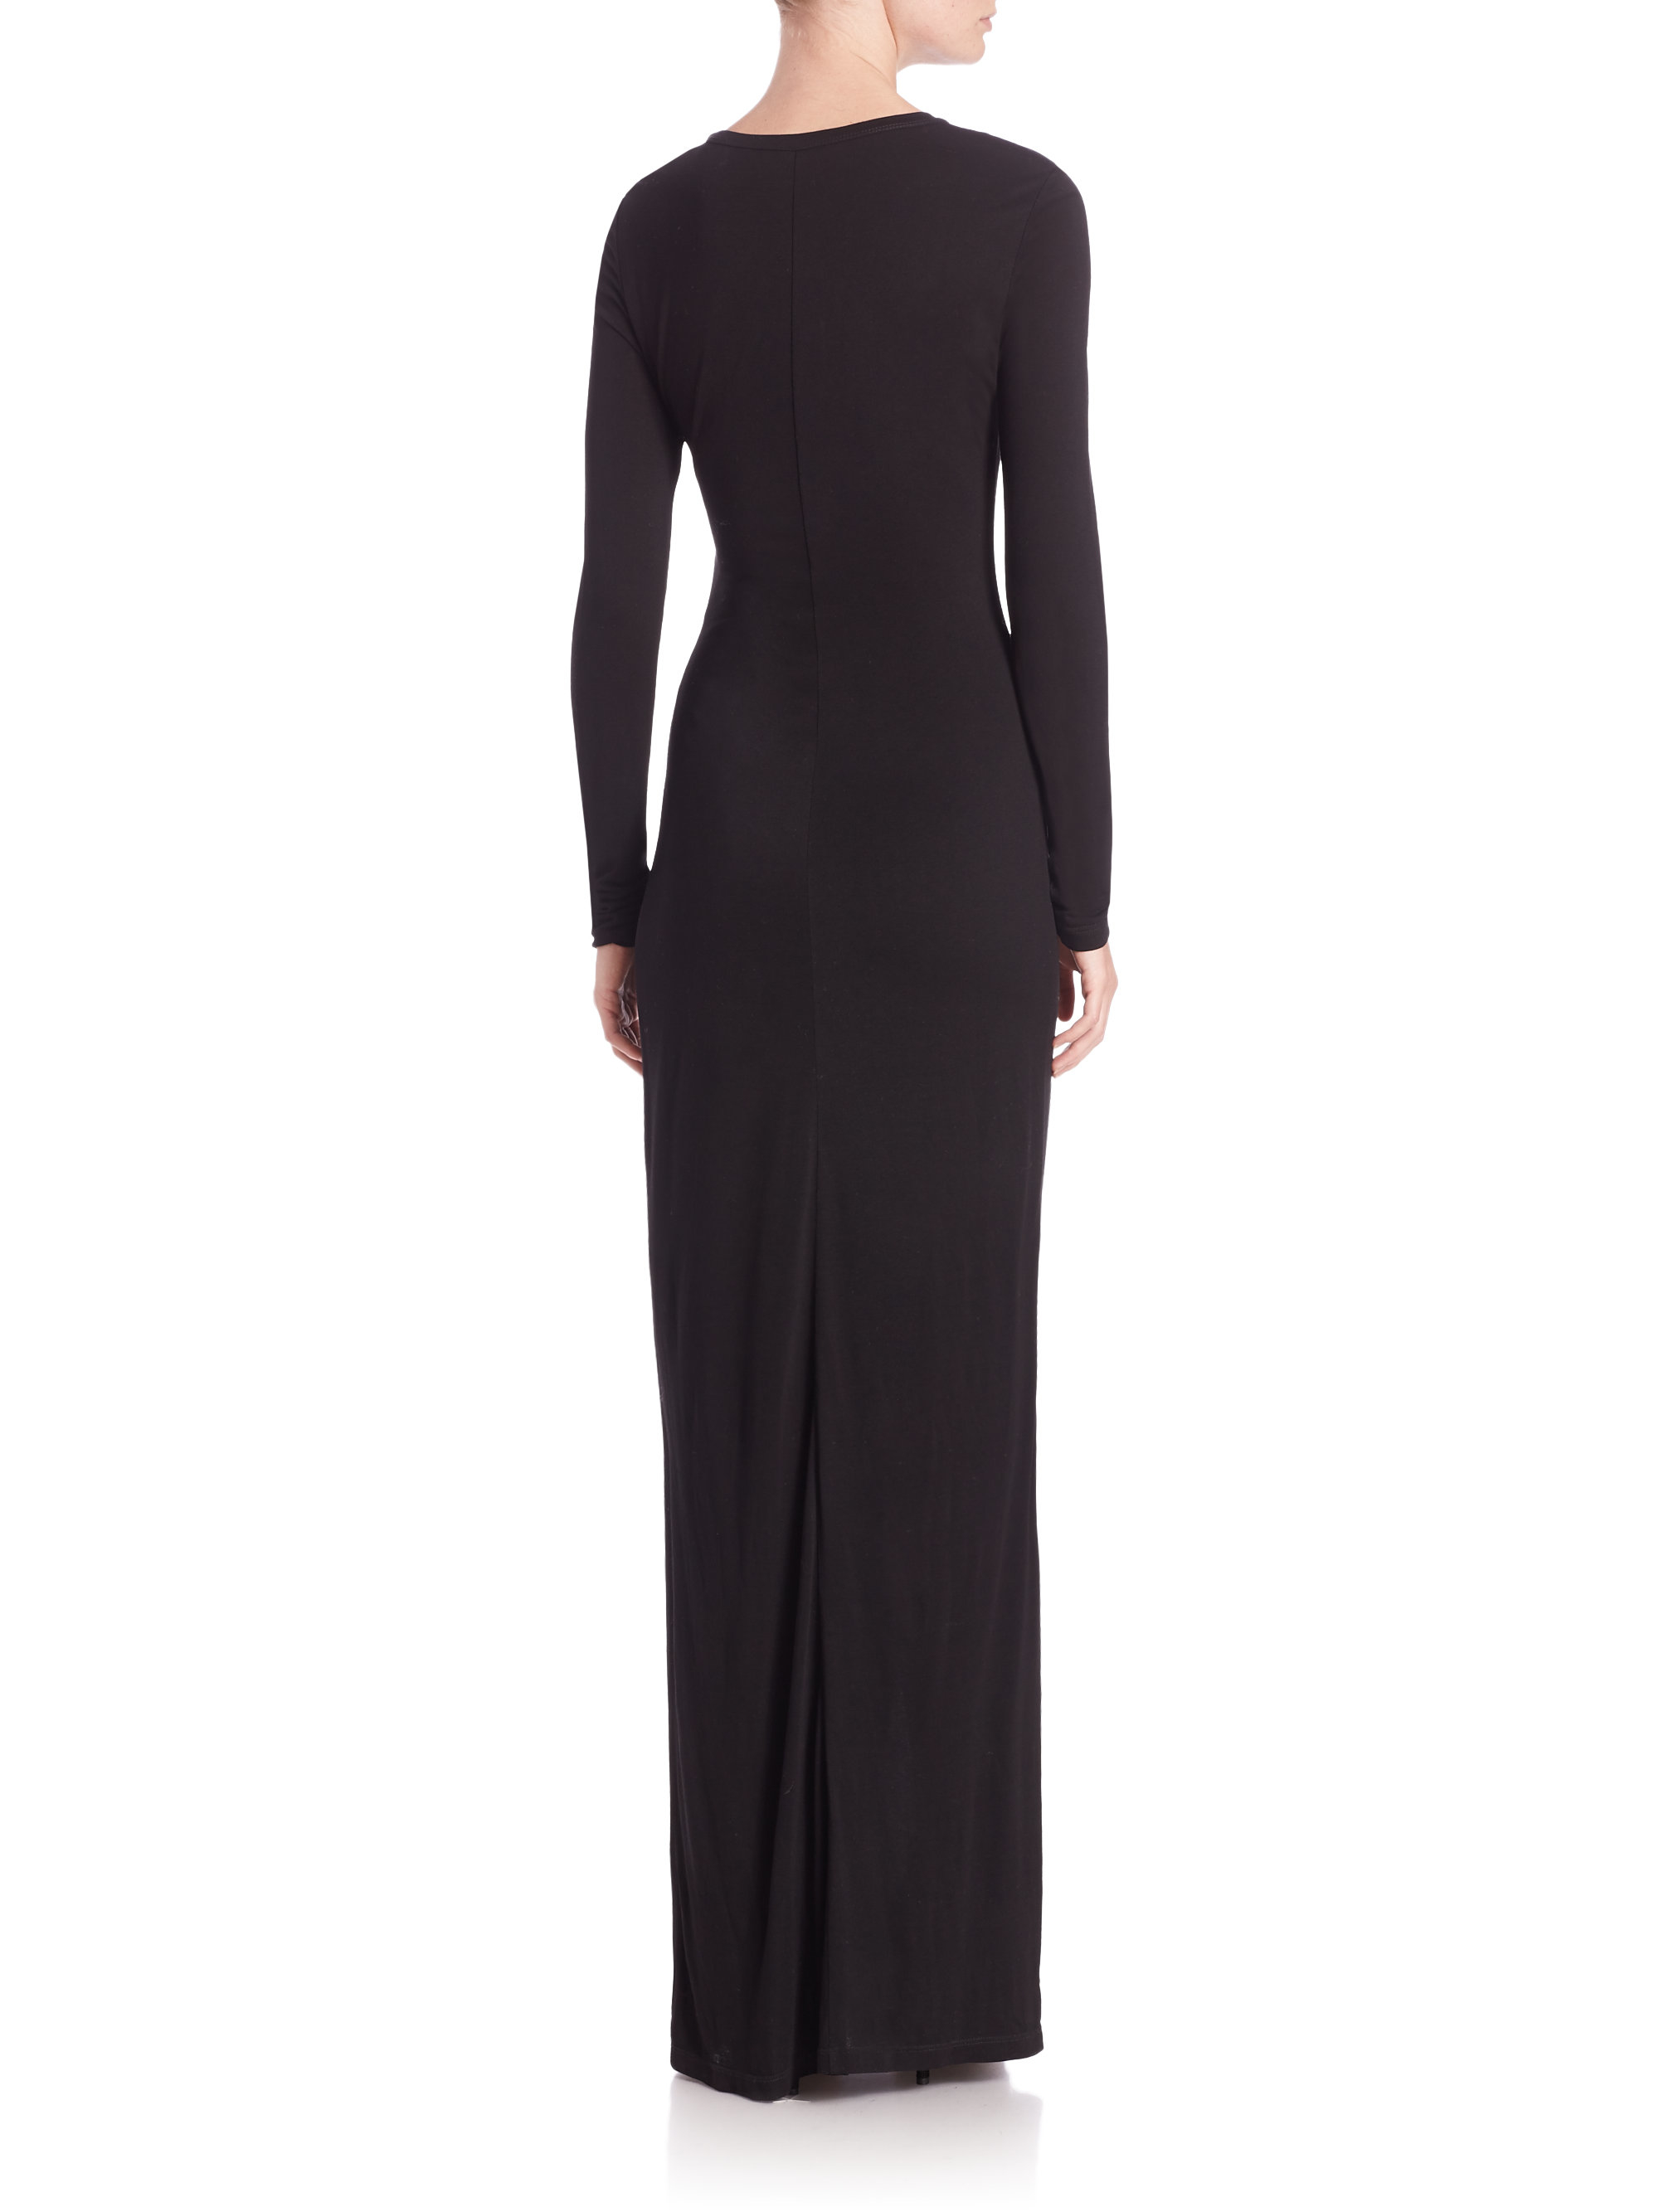 A.L.C. Vincent Gathered Long-sleeve Maxi Dress in Black - Lyst